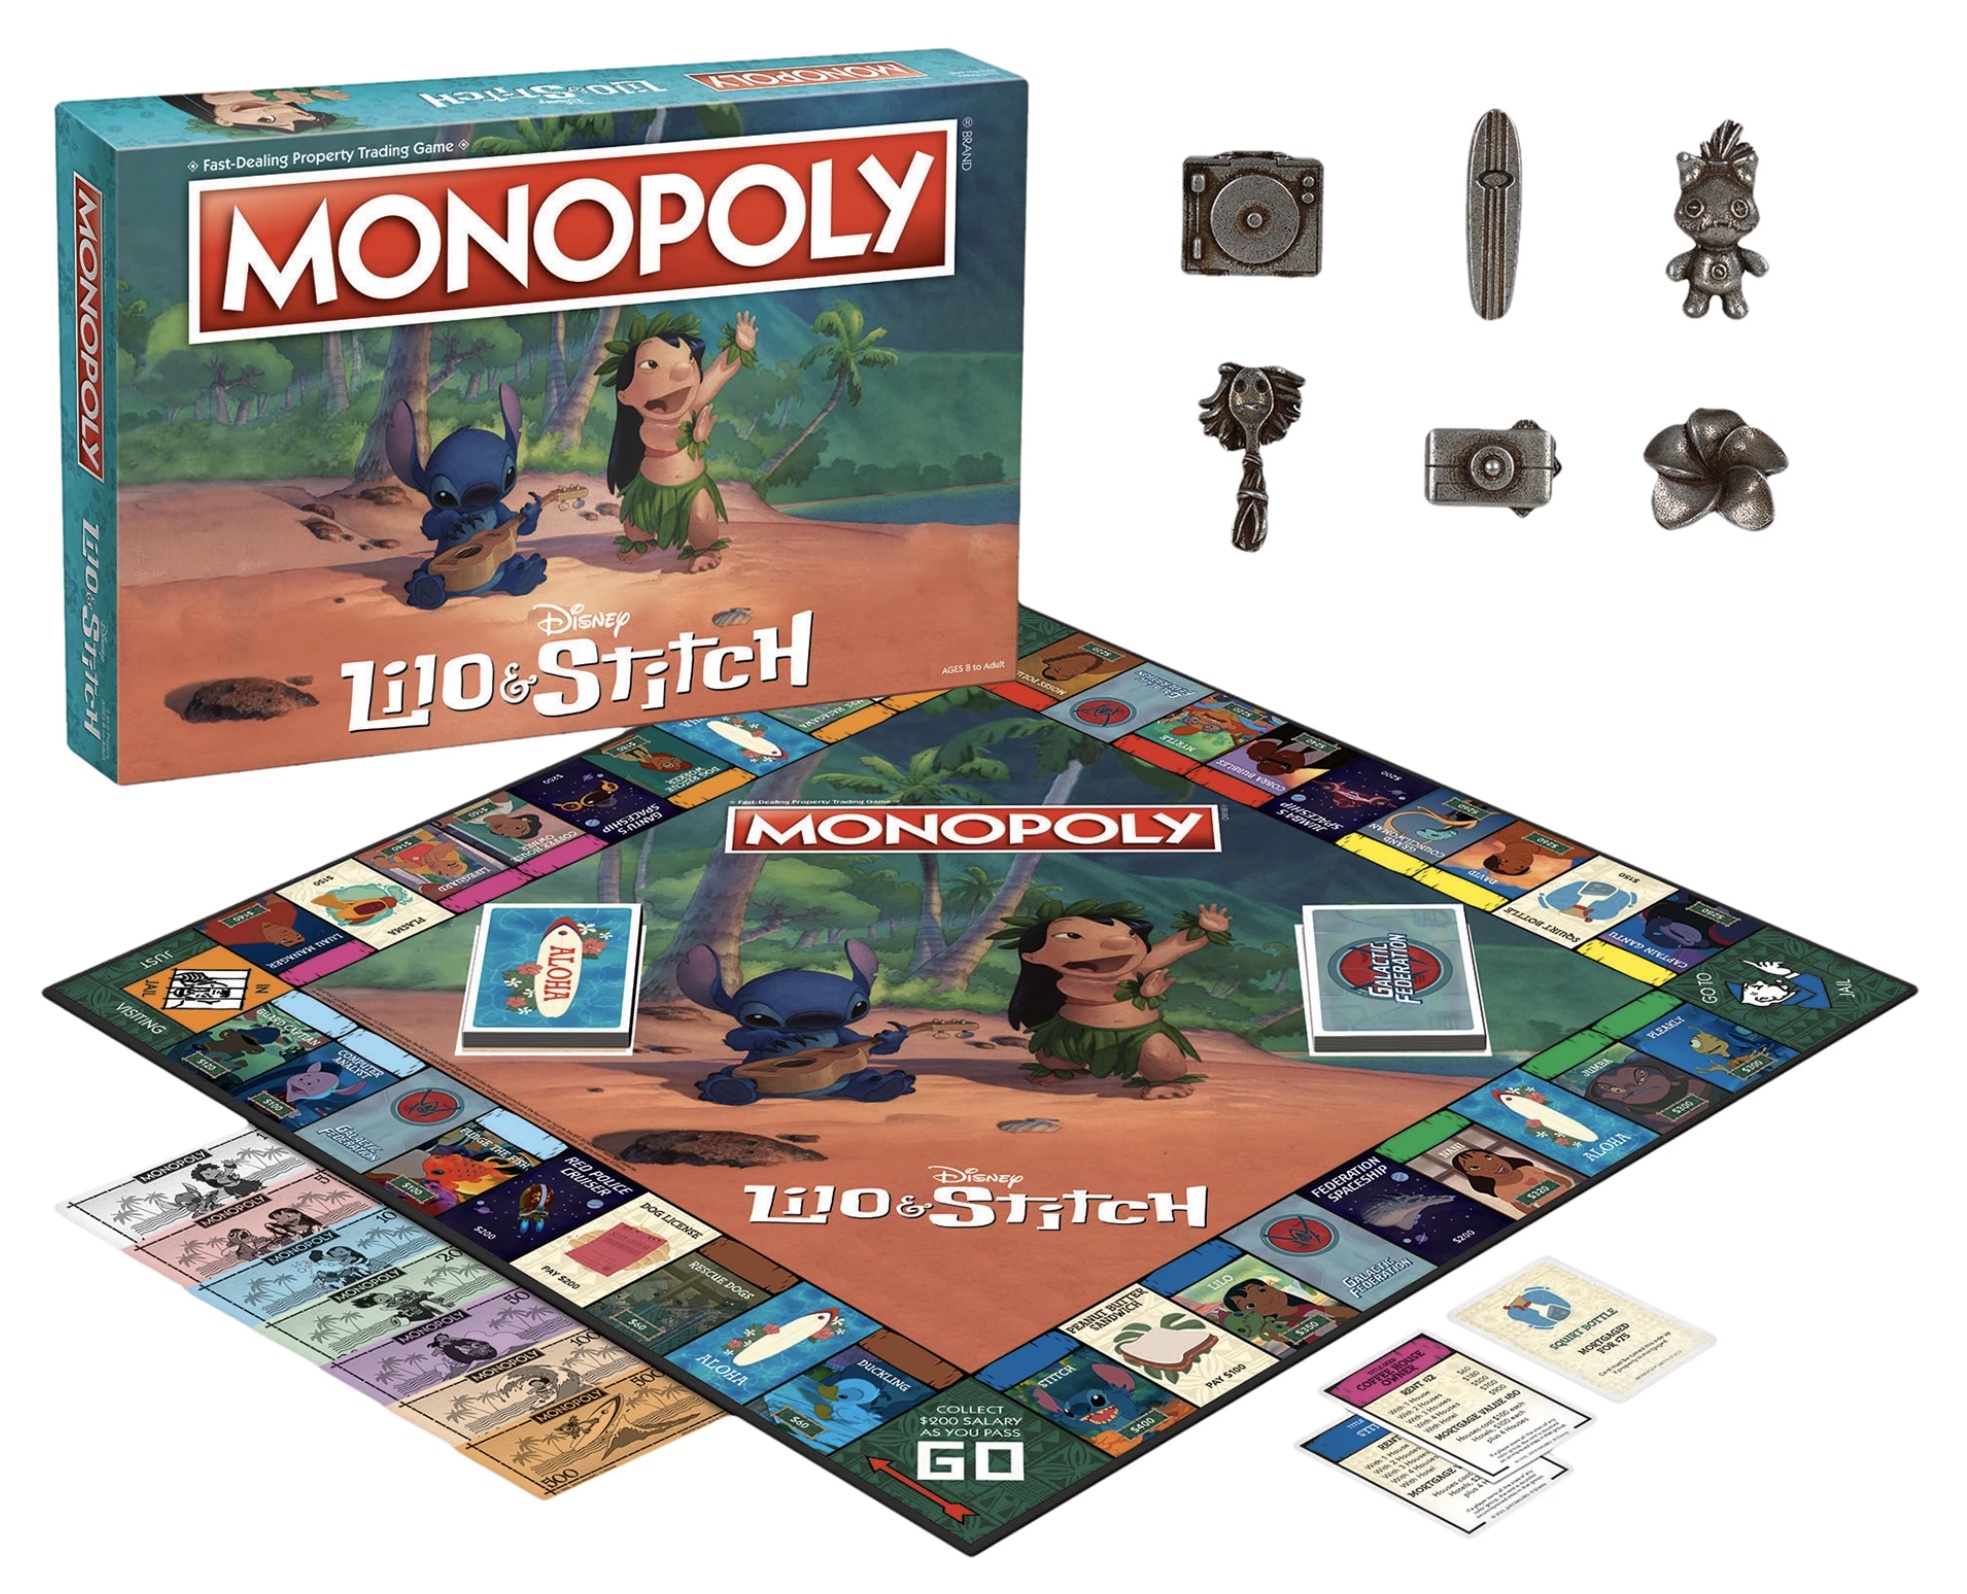 Disney's Lilo & Stitch Monopoly Board Let's You Buy and Trade Your